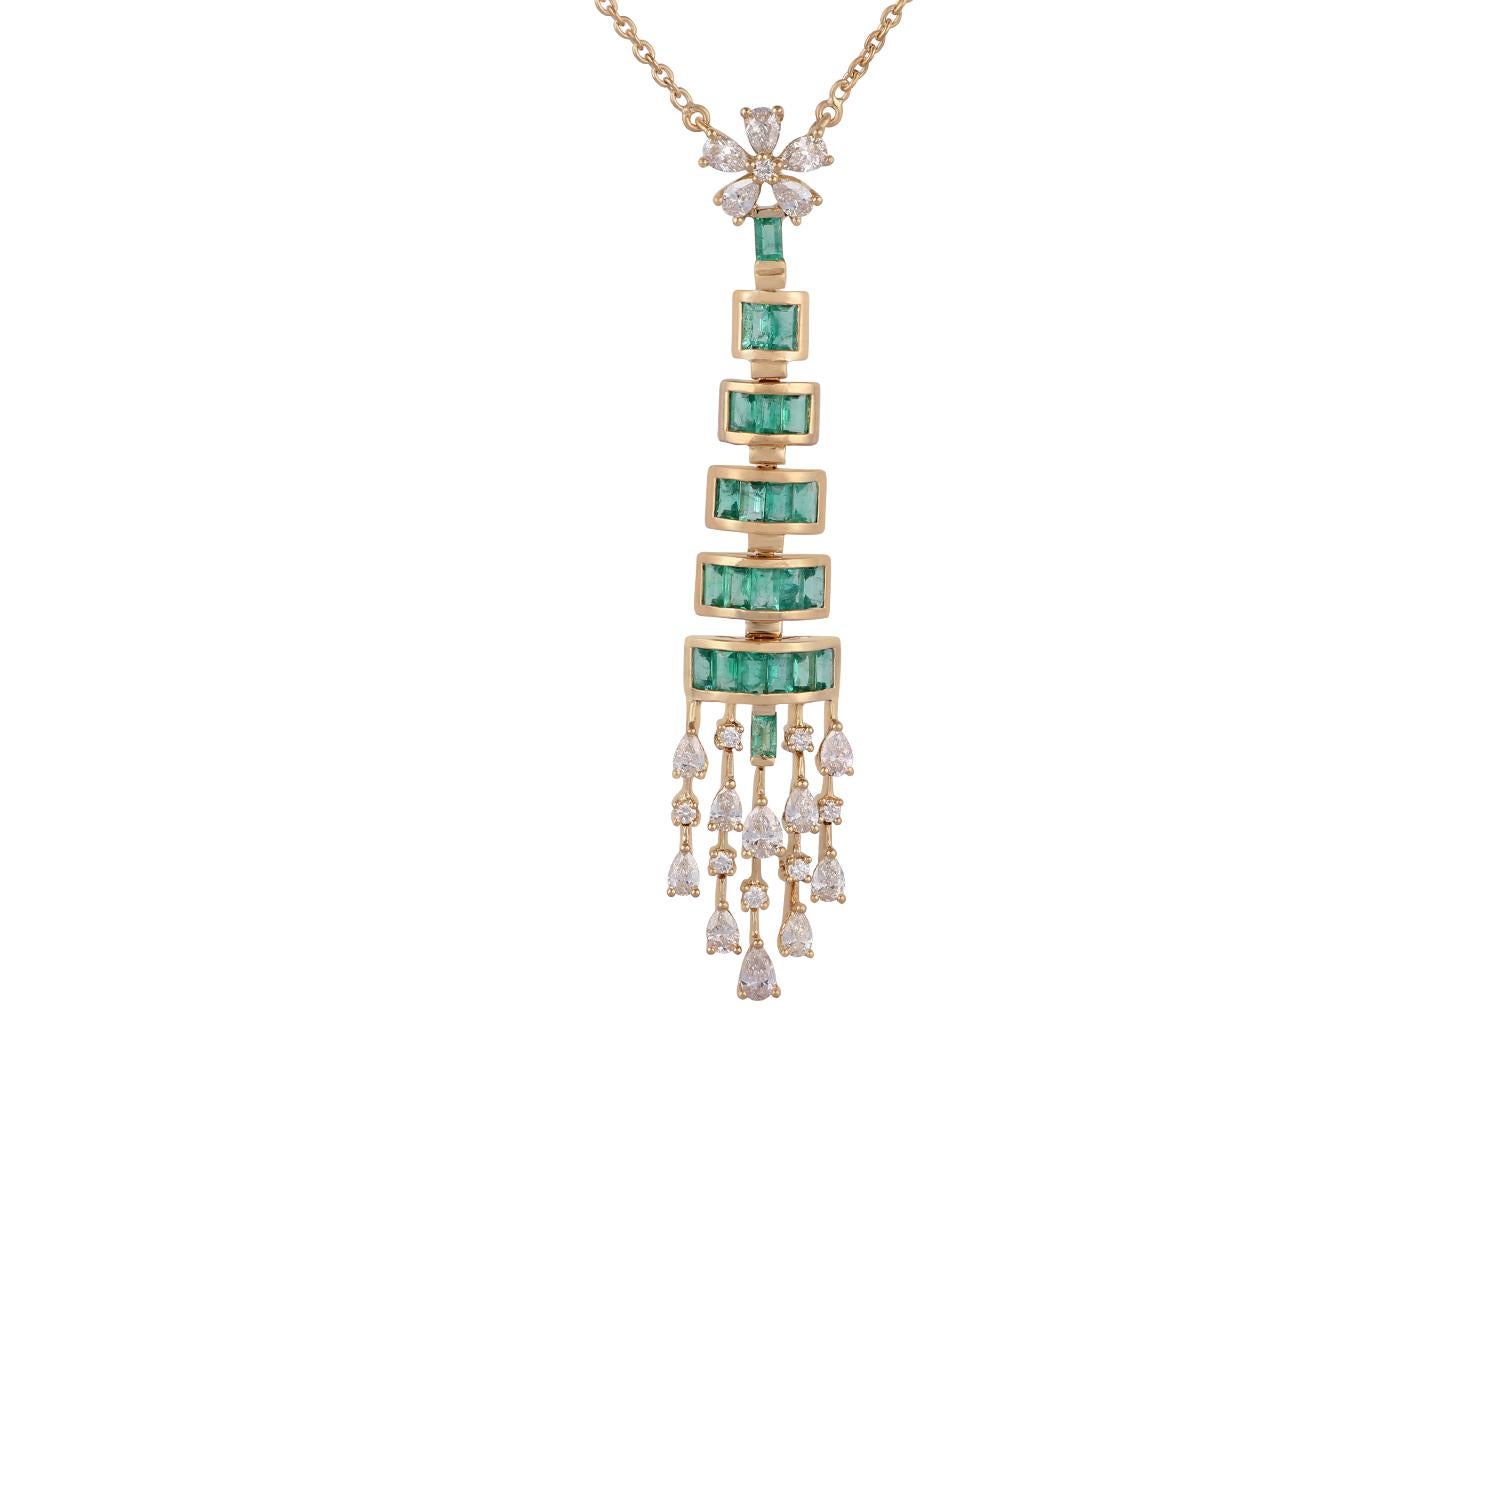 This is an exclusive emerald & diamond pendant necklace with chain features 22 baguette-shaped emeralds 1.86 carat, 15 pear-shaped diamonds 1.43 carat with 8 brilliant-cut round shaped diamonds 0.15 carat, this pendant entirely made in 18 karat